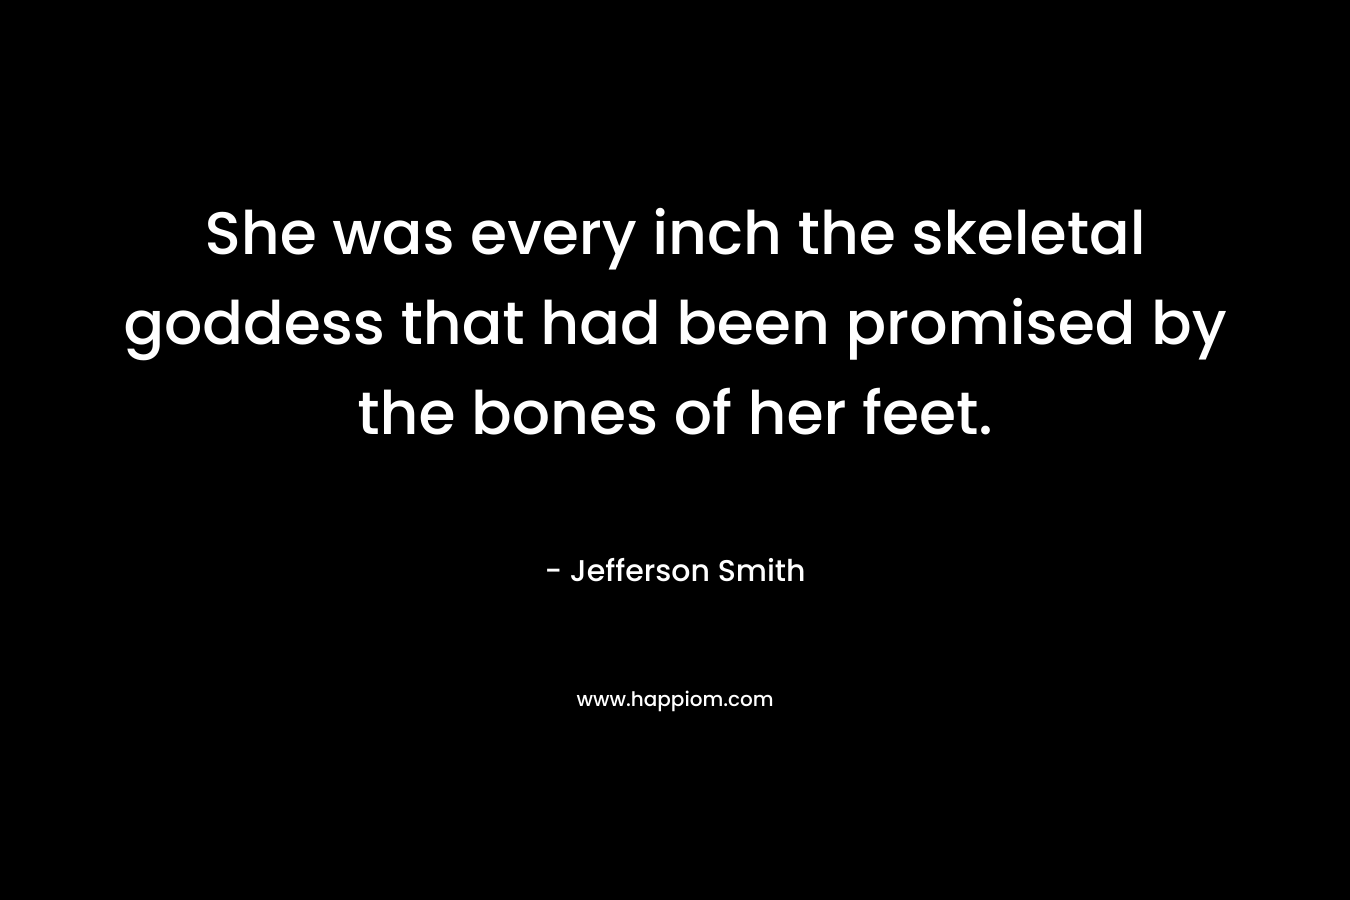 She was every inch the skeletal goddess that had been promised by the bones of her feet.